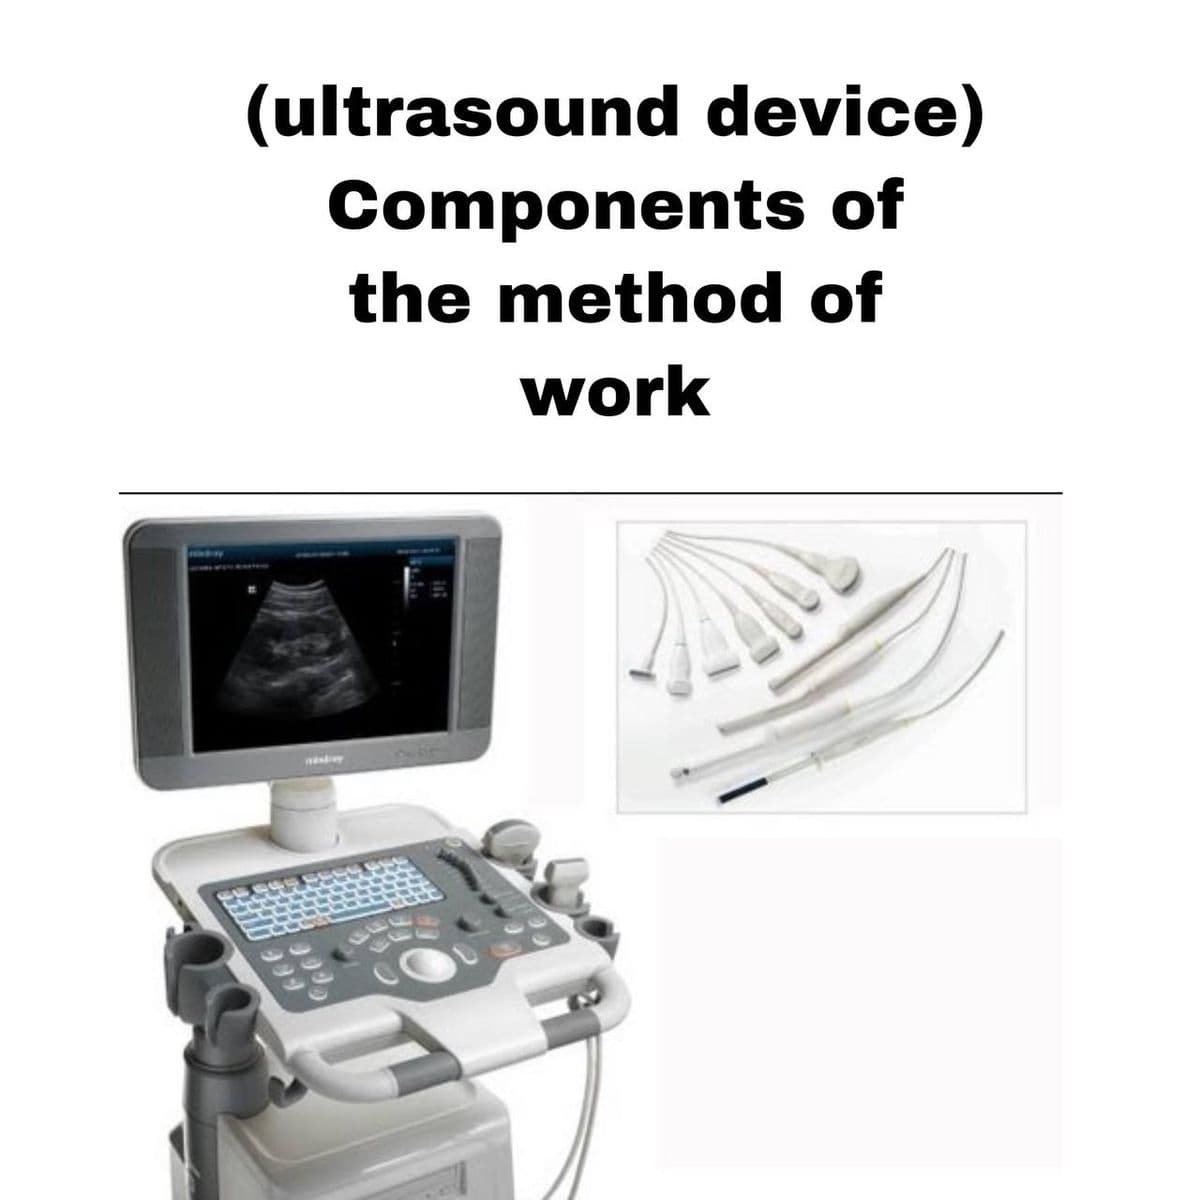 (ultrasound device)
Components of
the method of
work
Hill ****
000